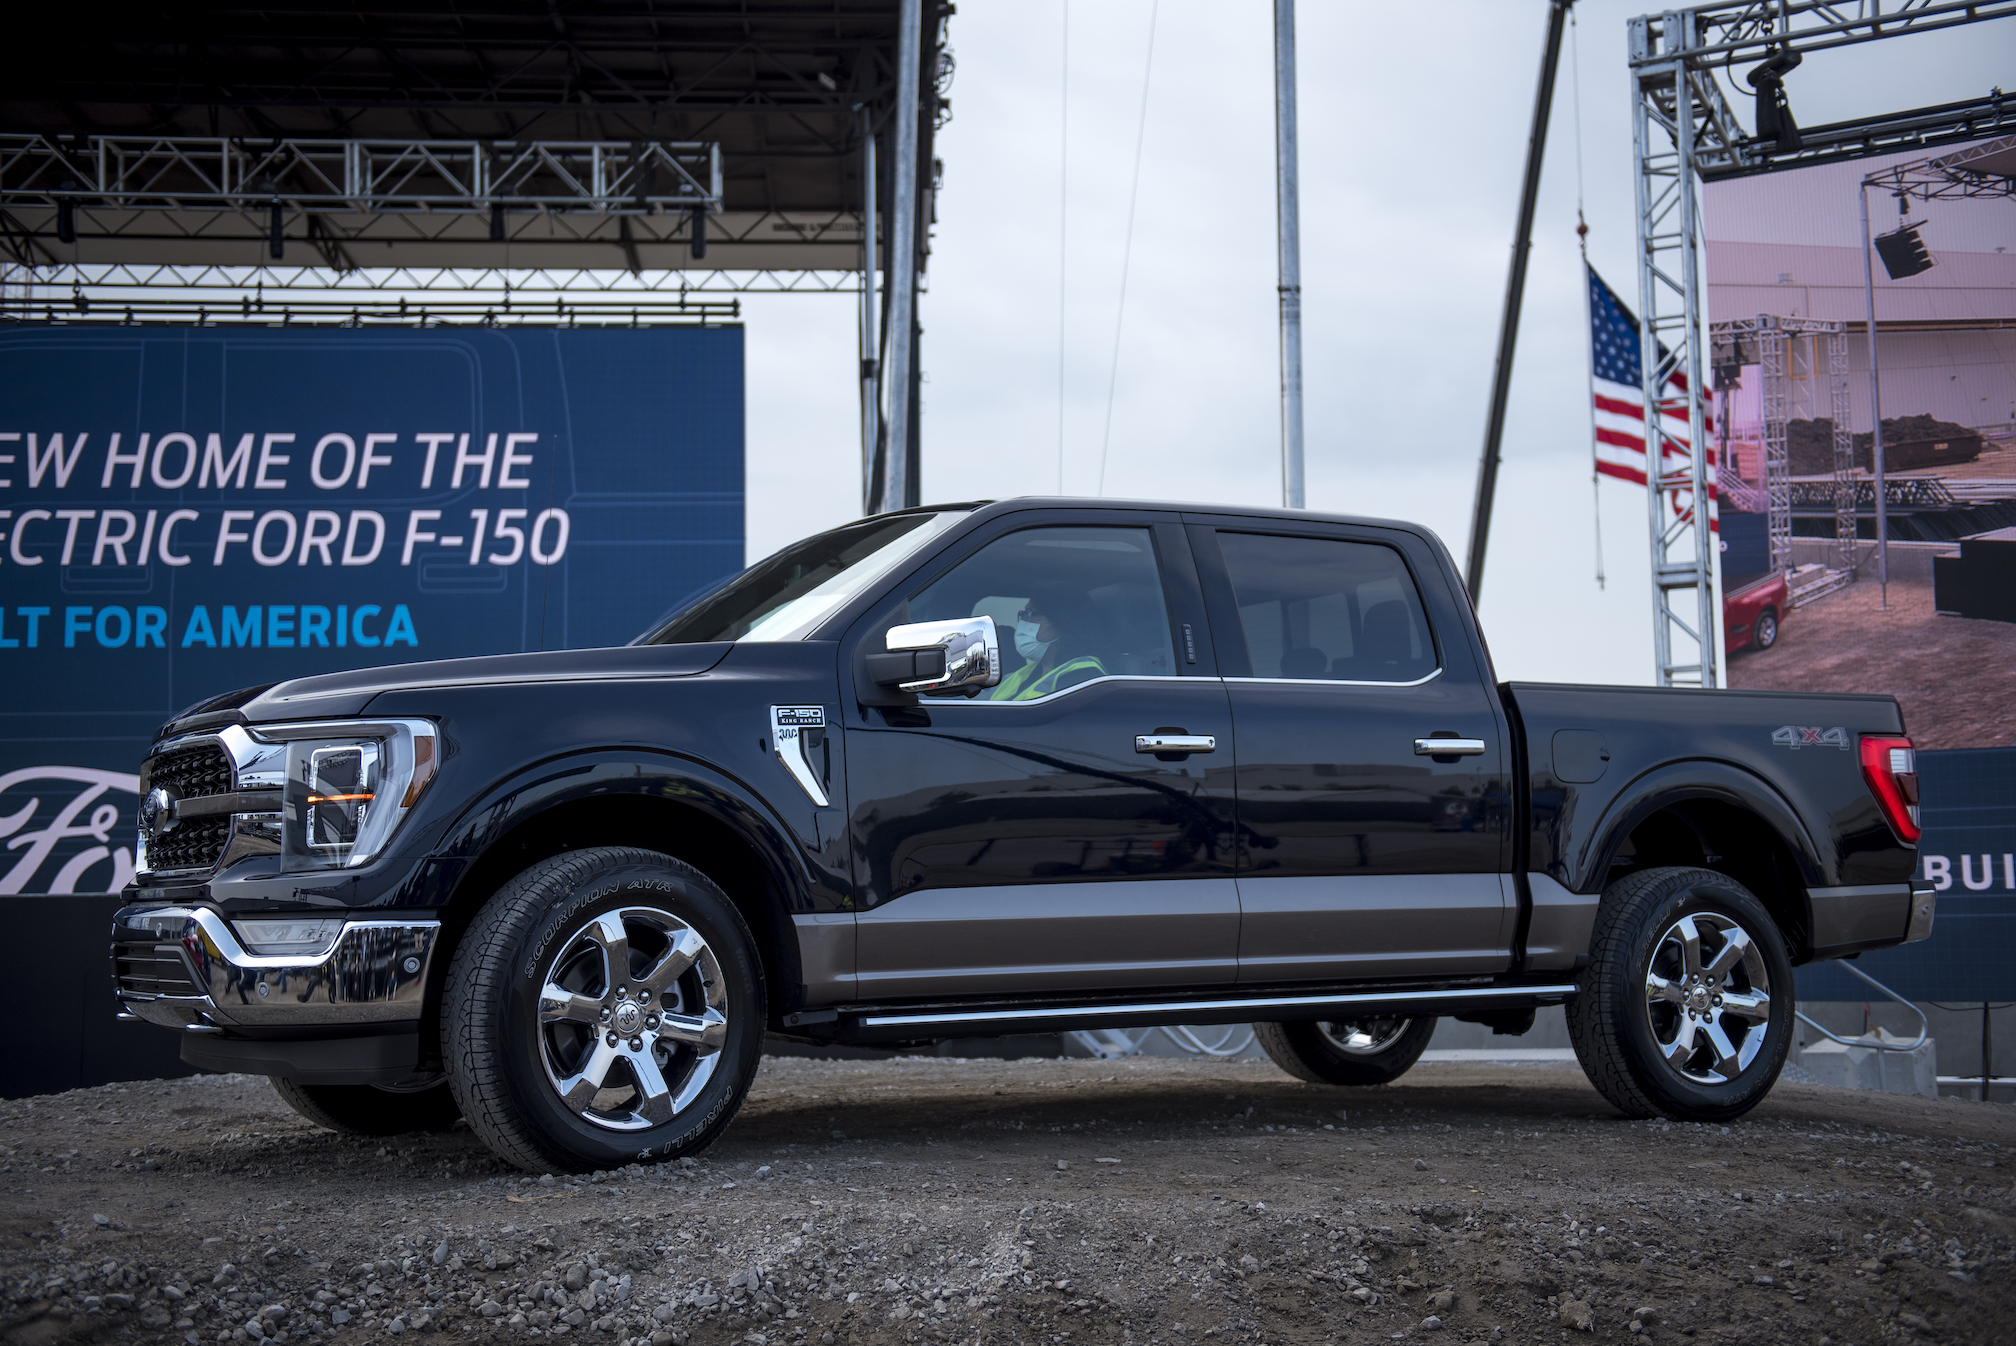 The 2021 Ford F-150 King Ranch Truck appears at the Ford Built for America event